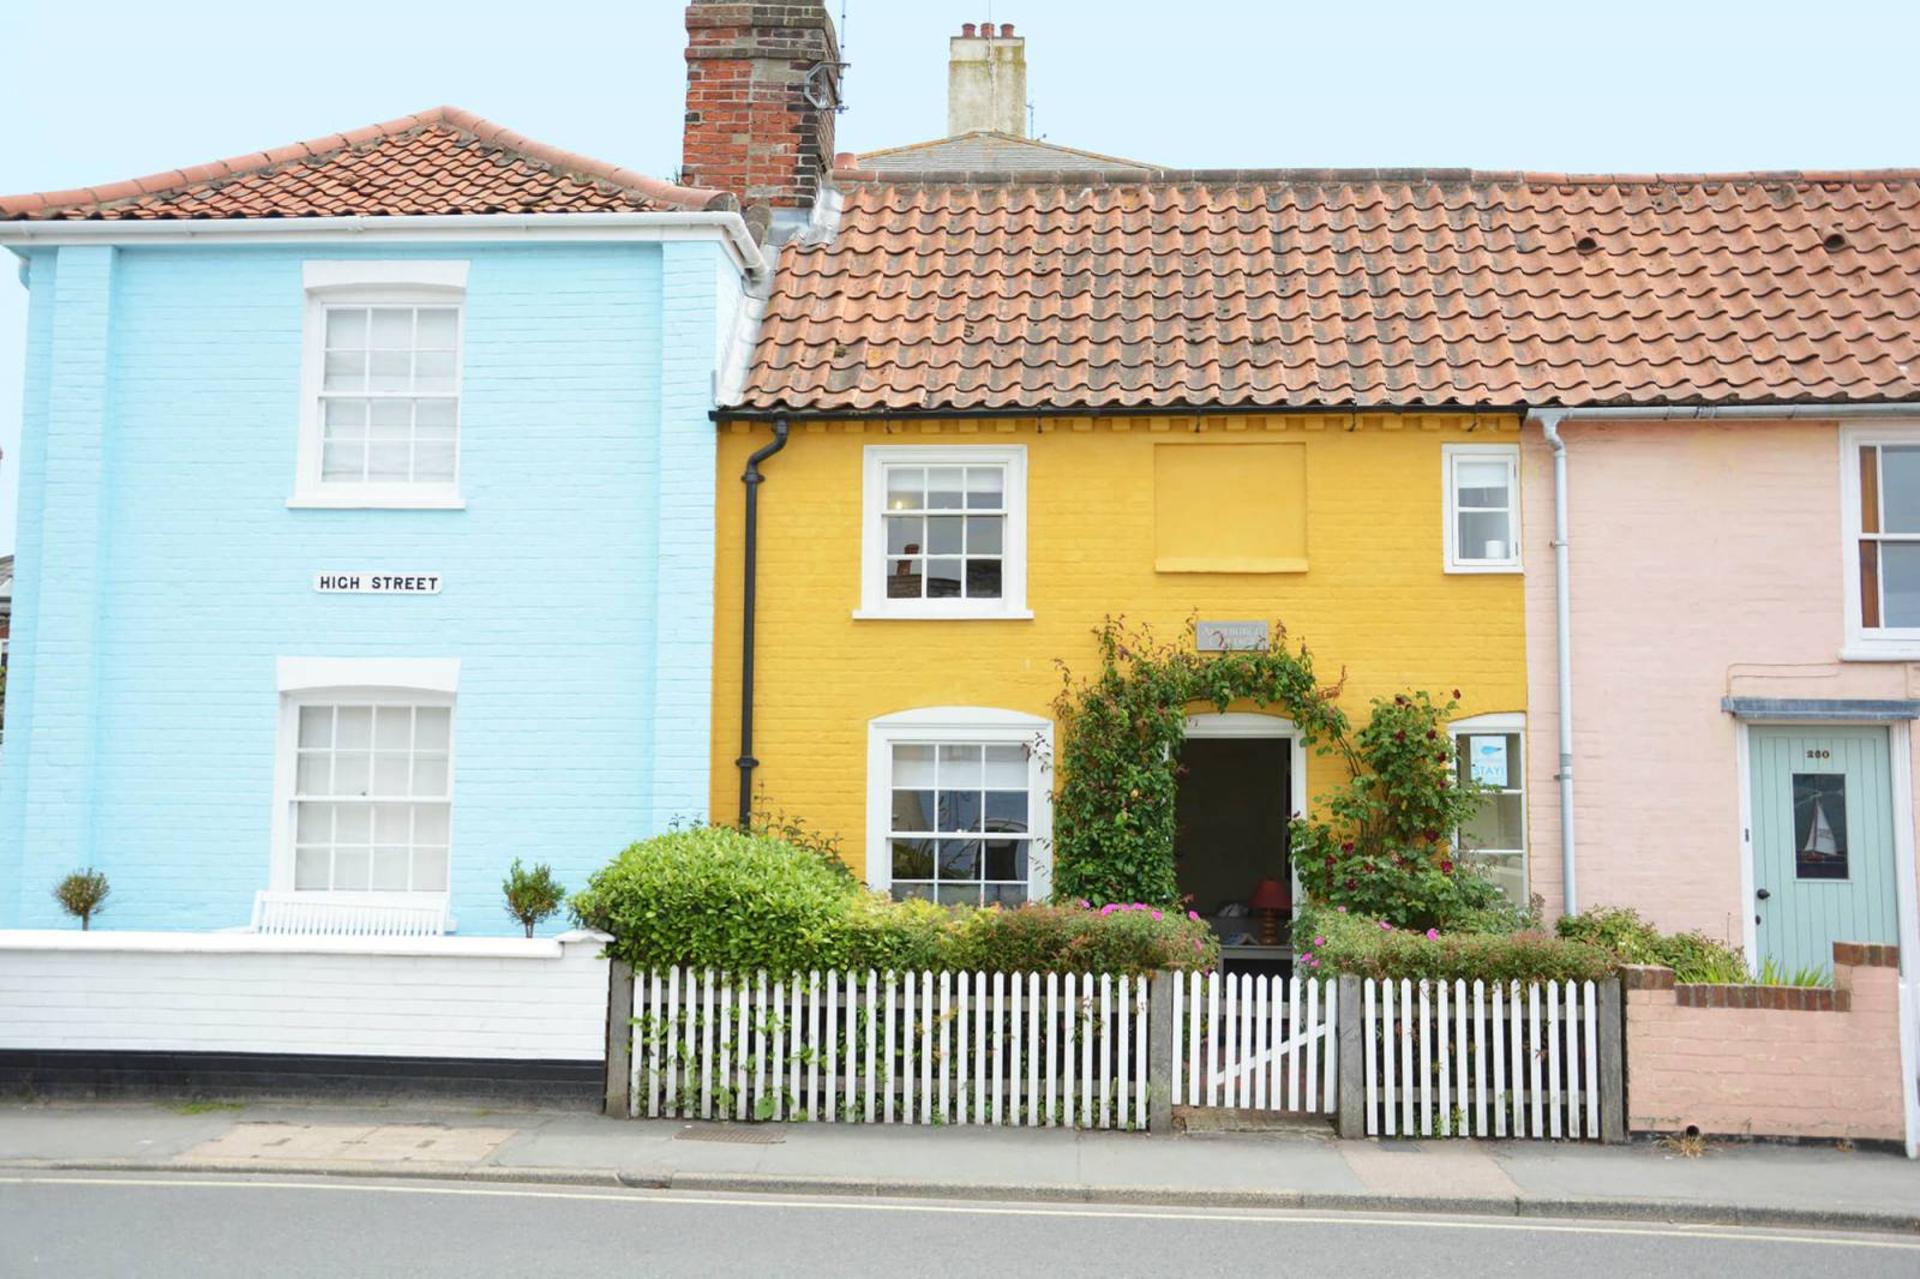 Sykes Holiday Cottages acquires Suffolk firm as staycation M&A continues